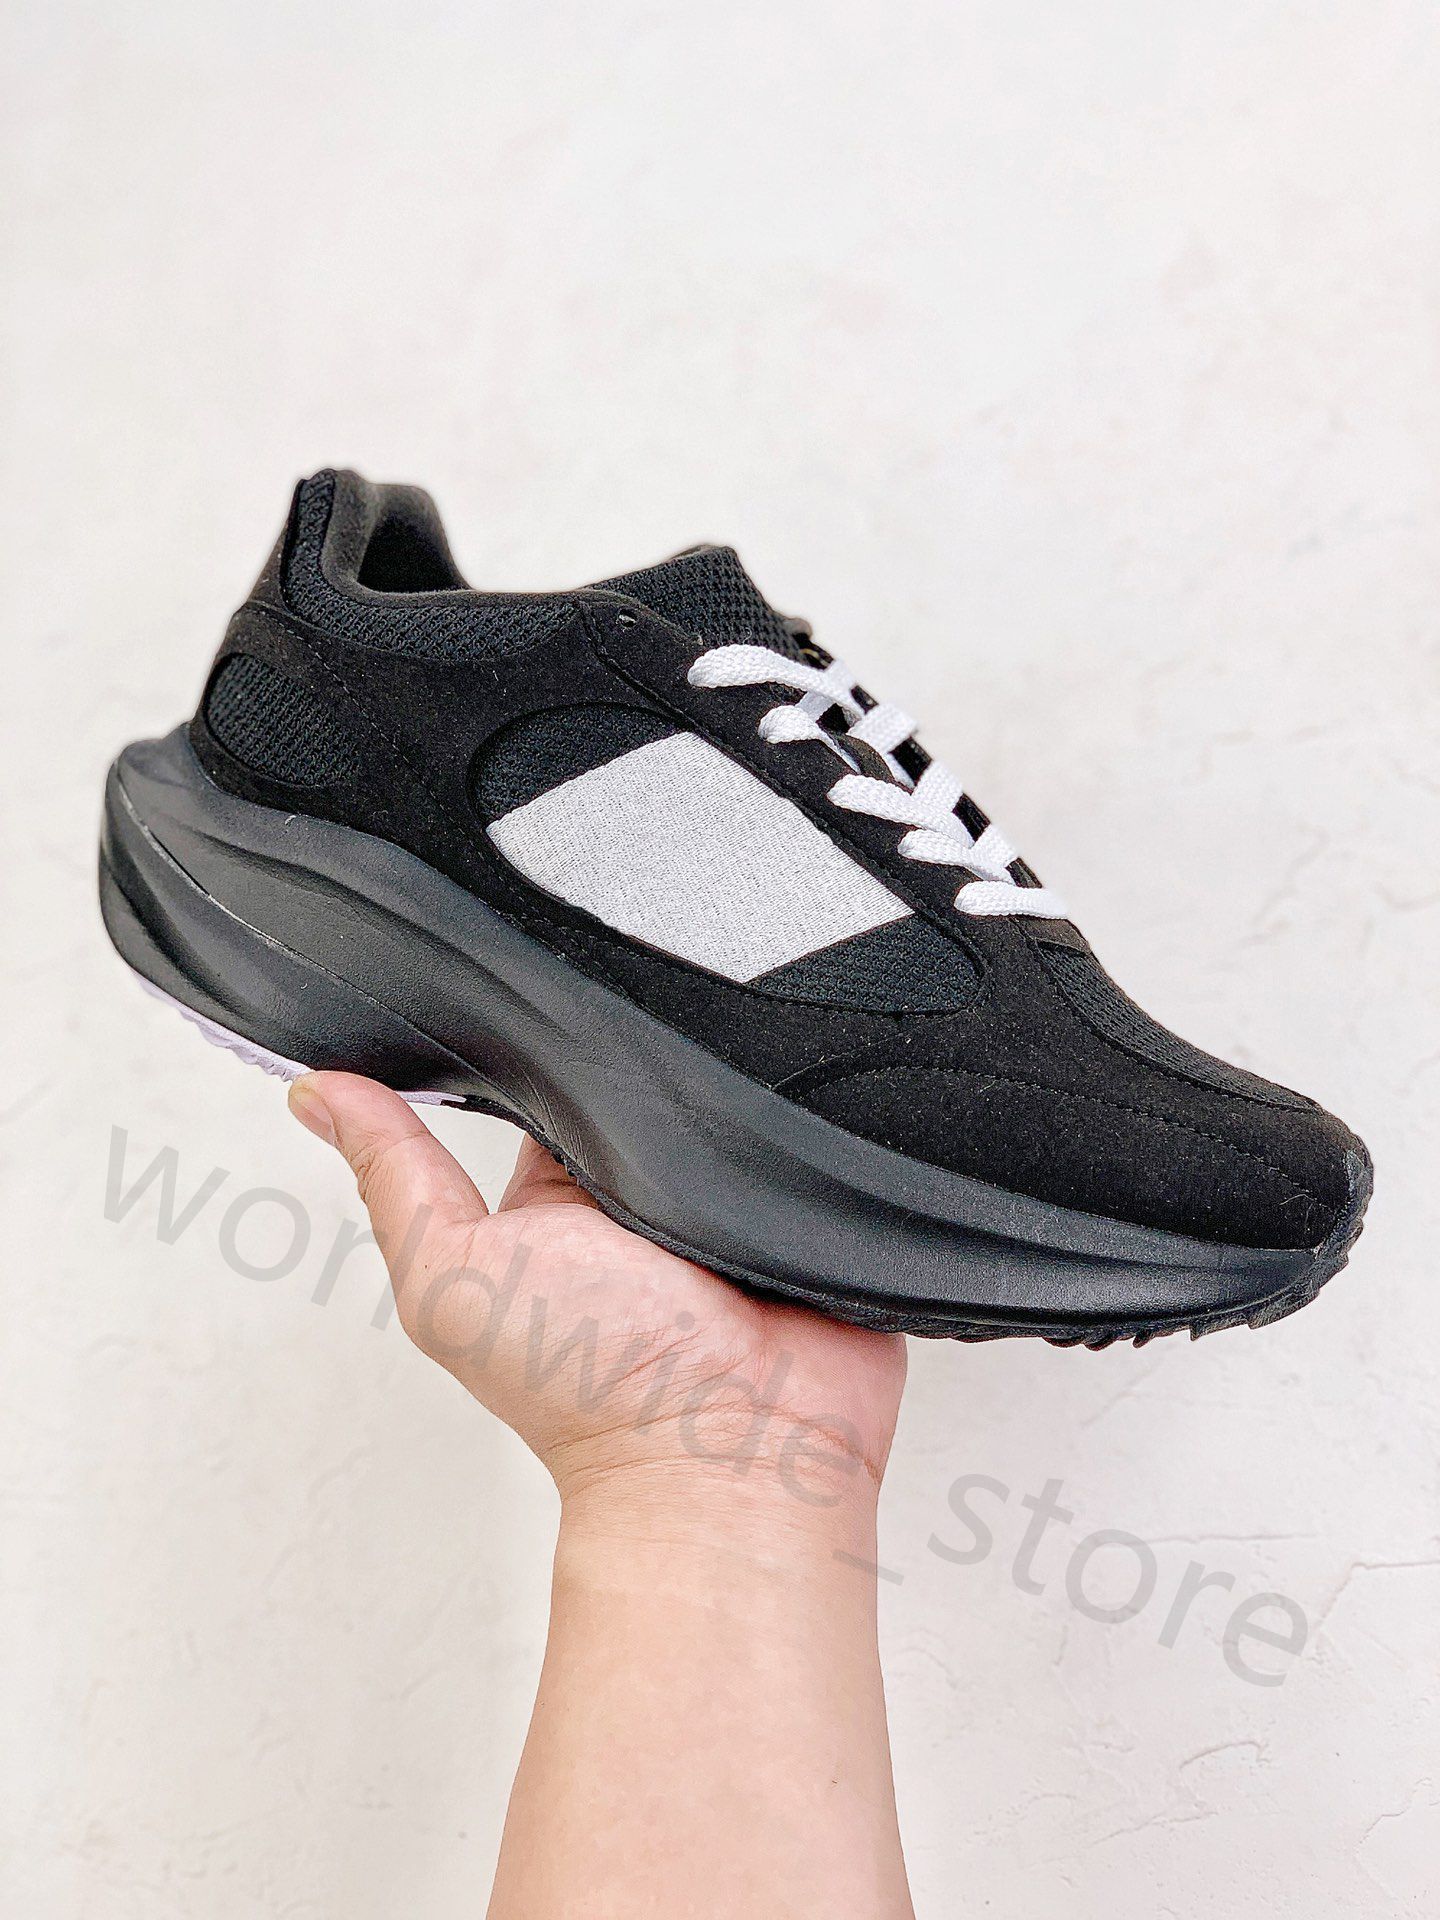 Designer Sports Shoes WRPD RUNNER Running Shoes Trail Road Lifestyle Hiking Shoes King Hat Popular Sports Shoes Shop Sports 36-46